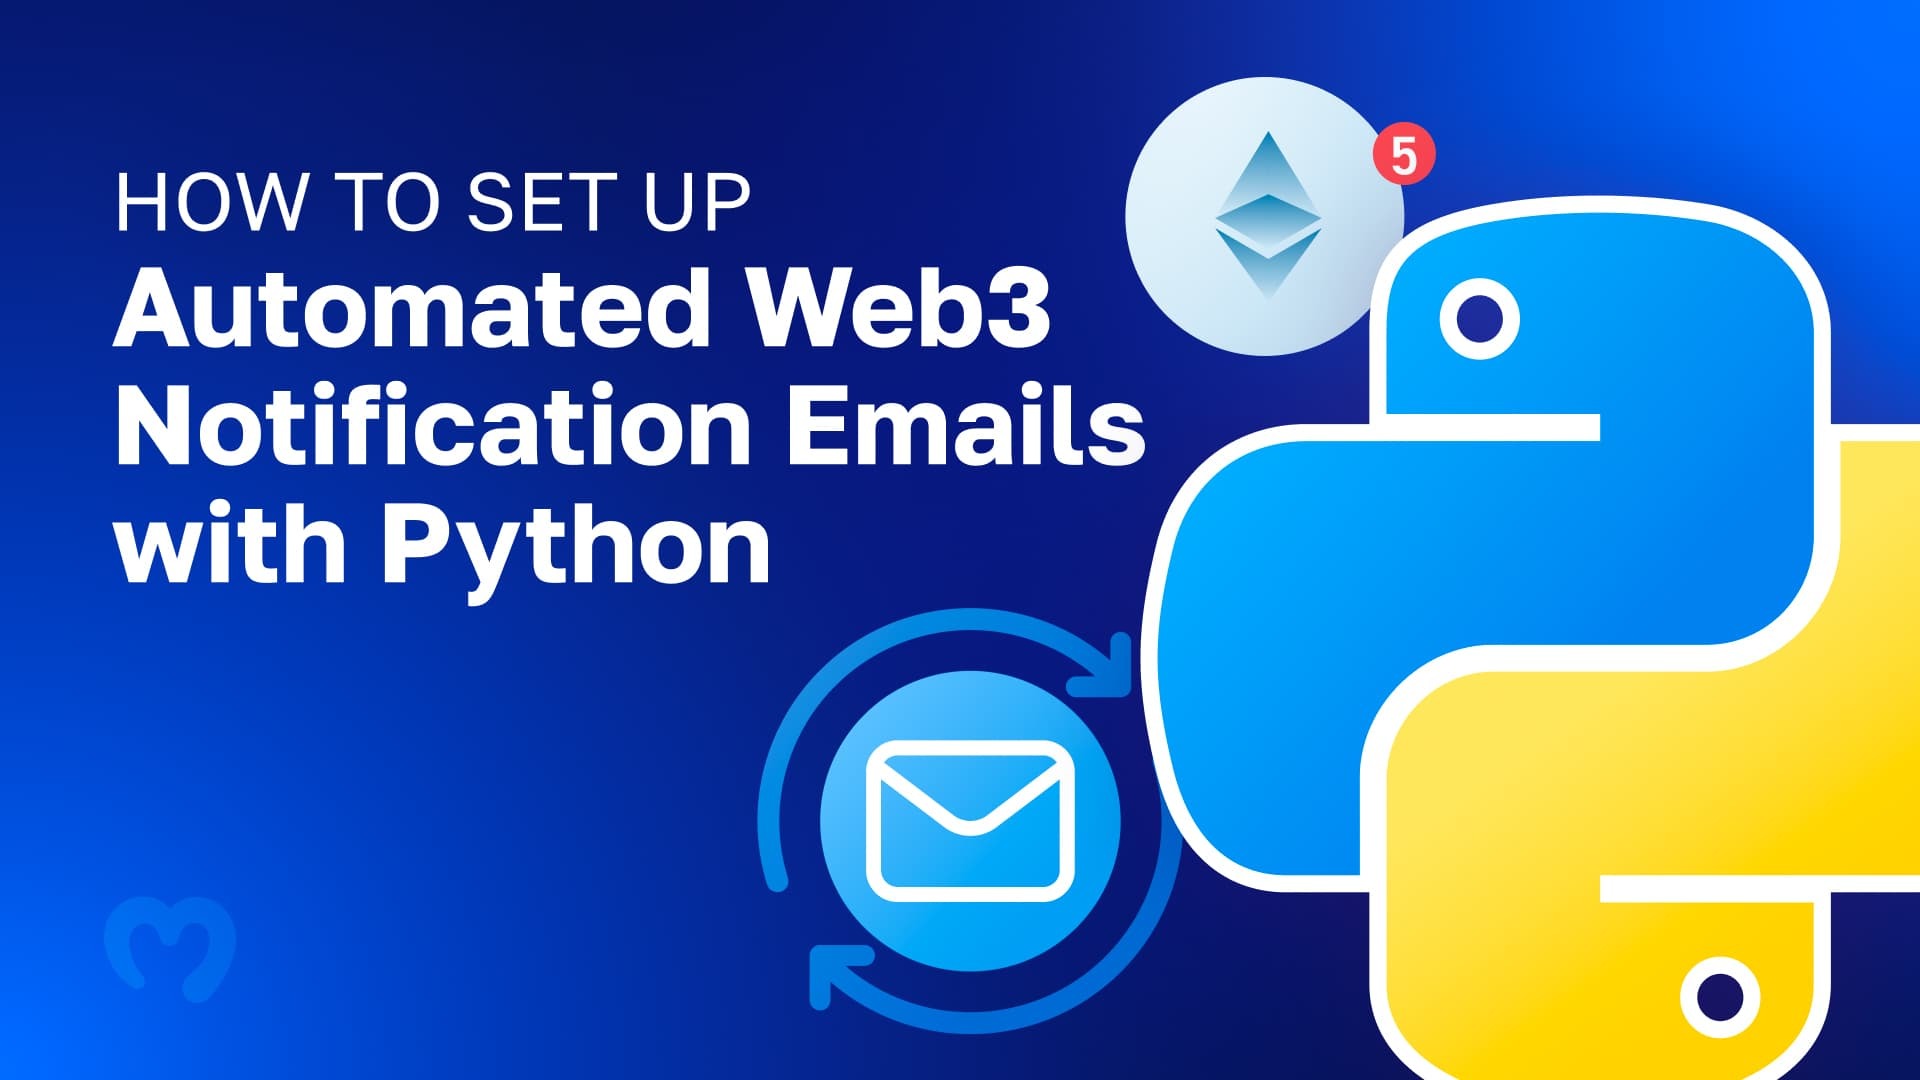 how to setup automated web3 notification emails with python